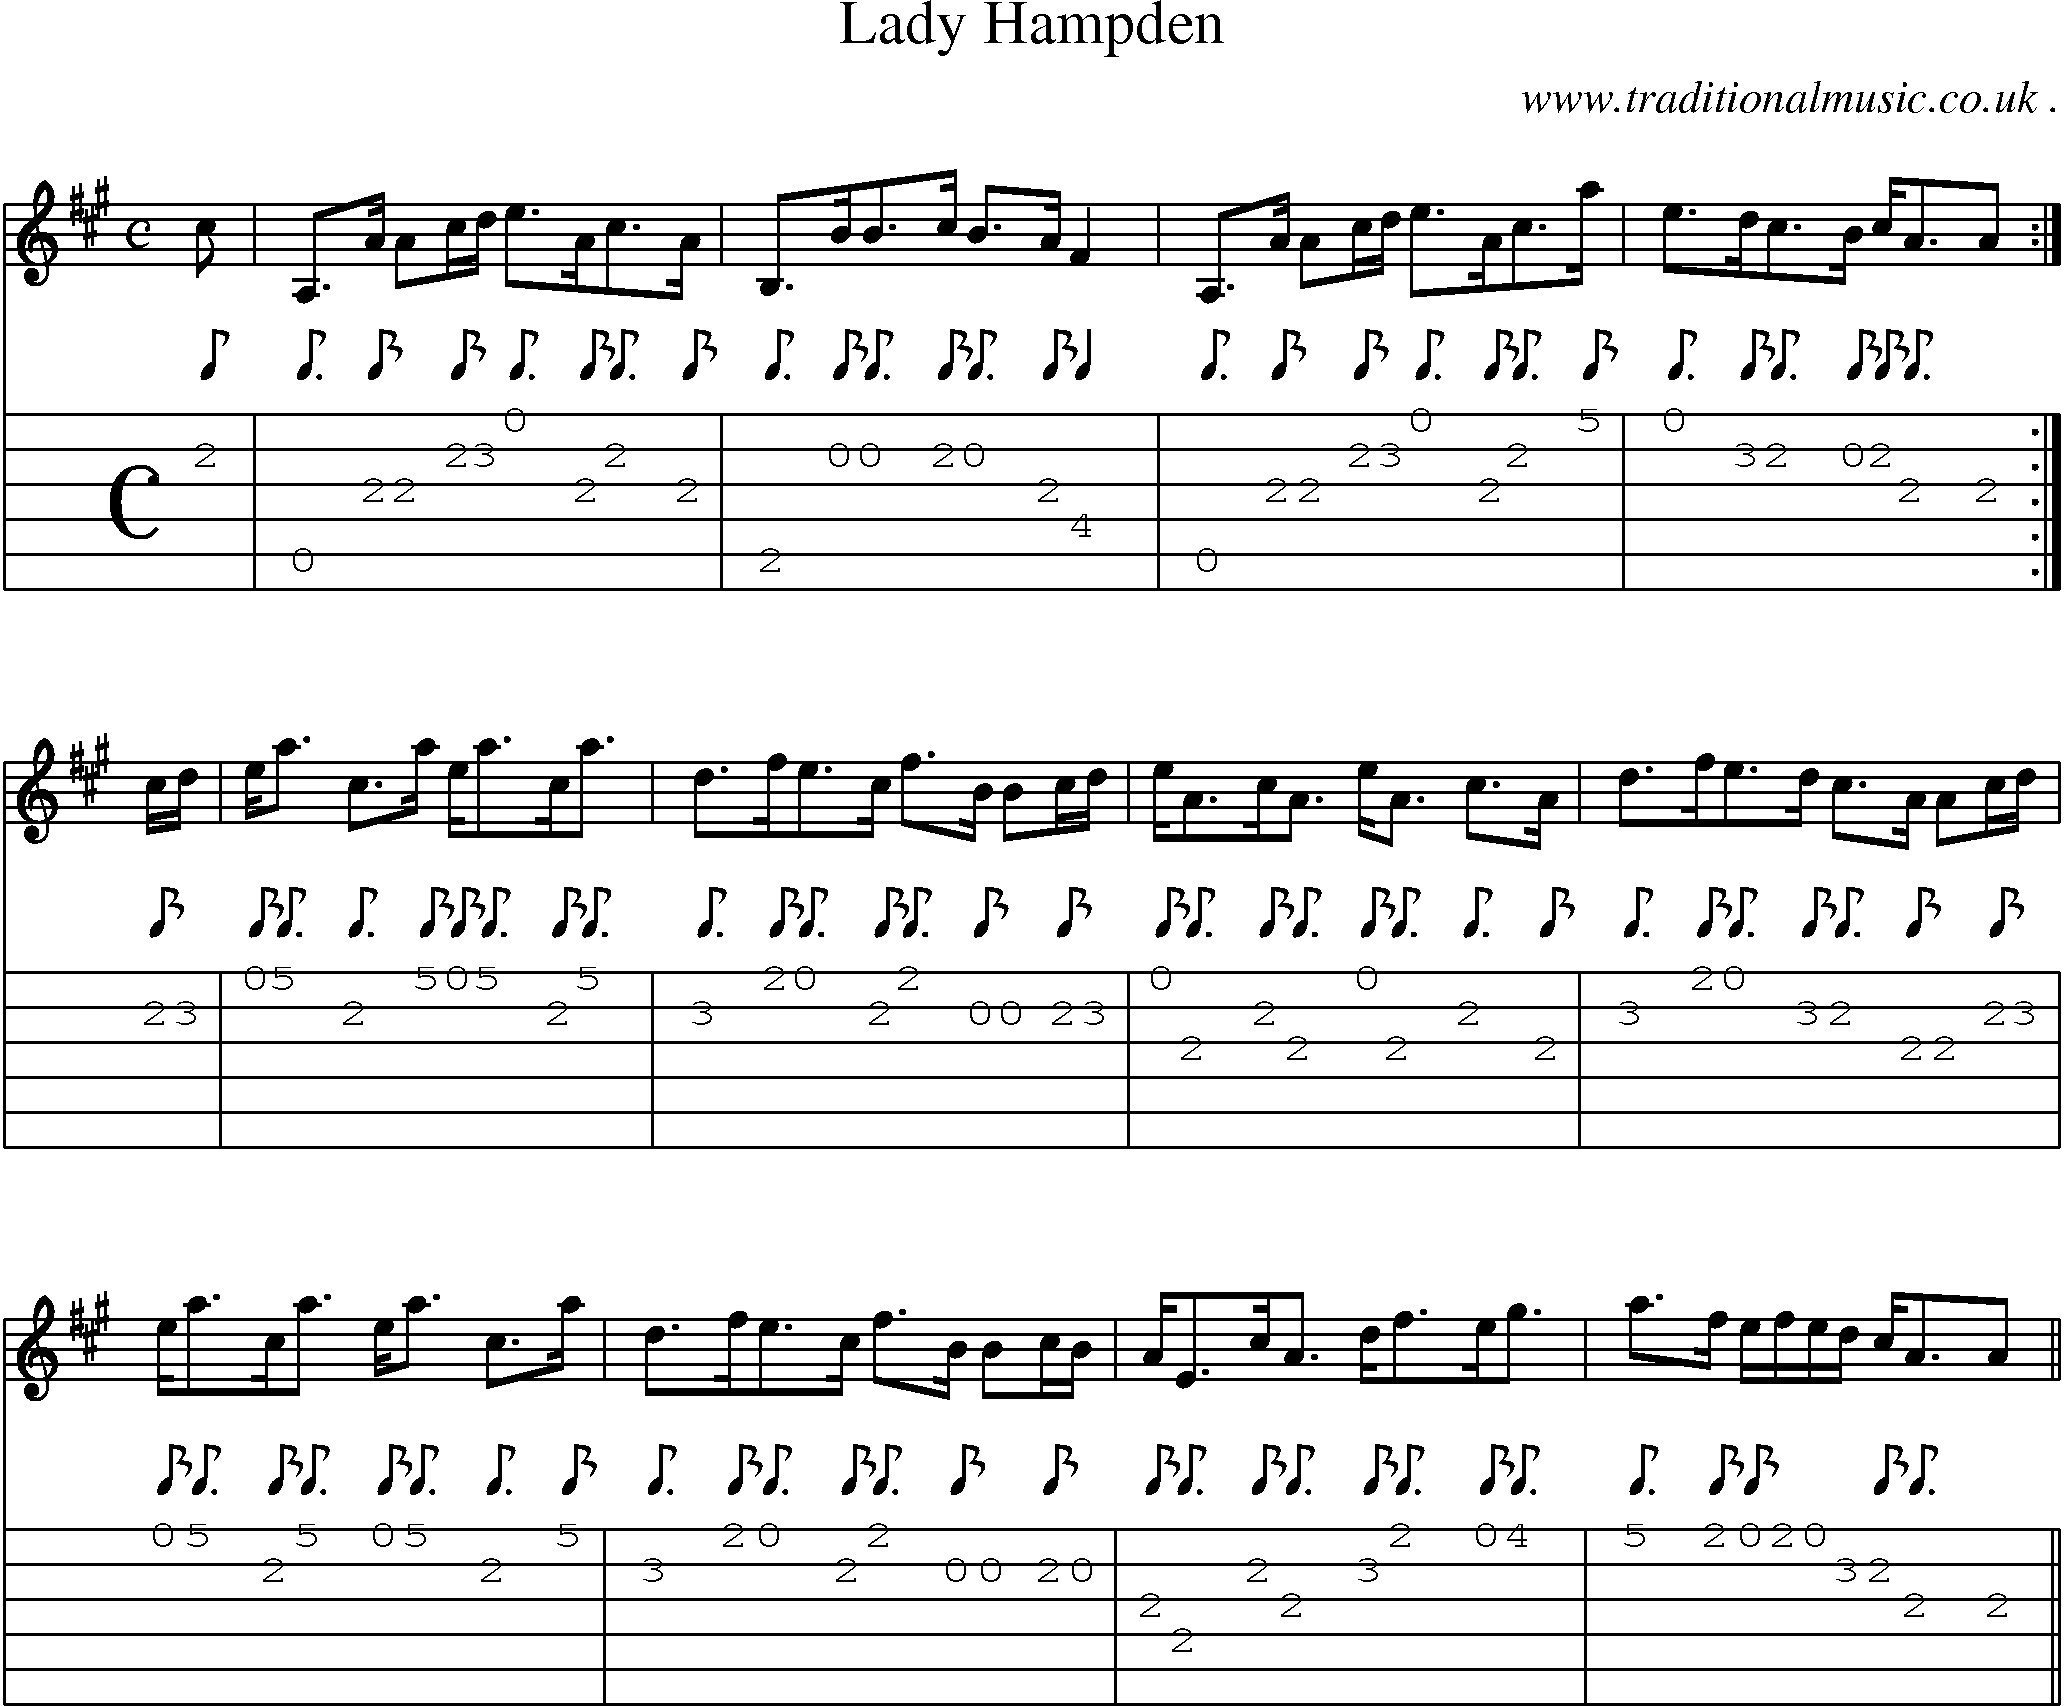 Sheet-music  score, Chords and Guitar Tabs for Lady Hampden